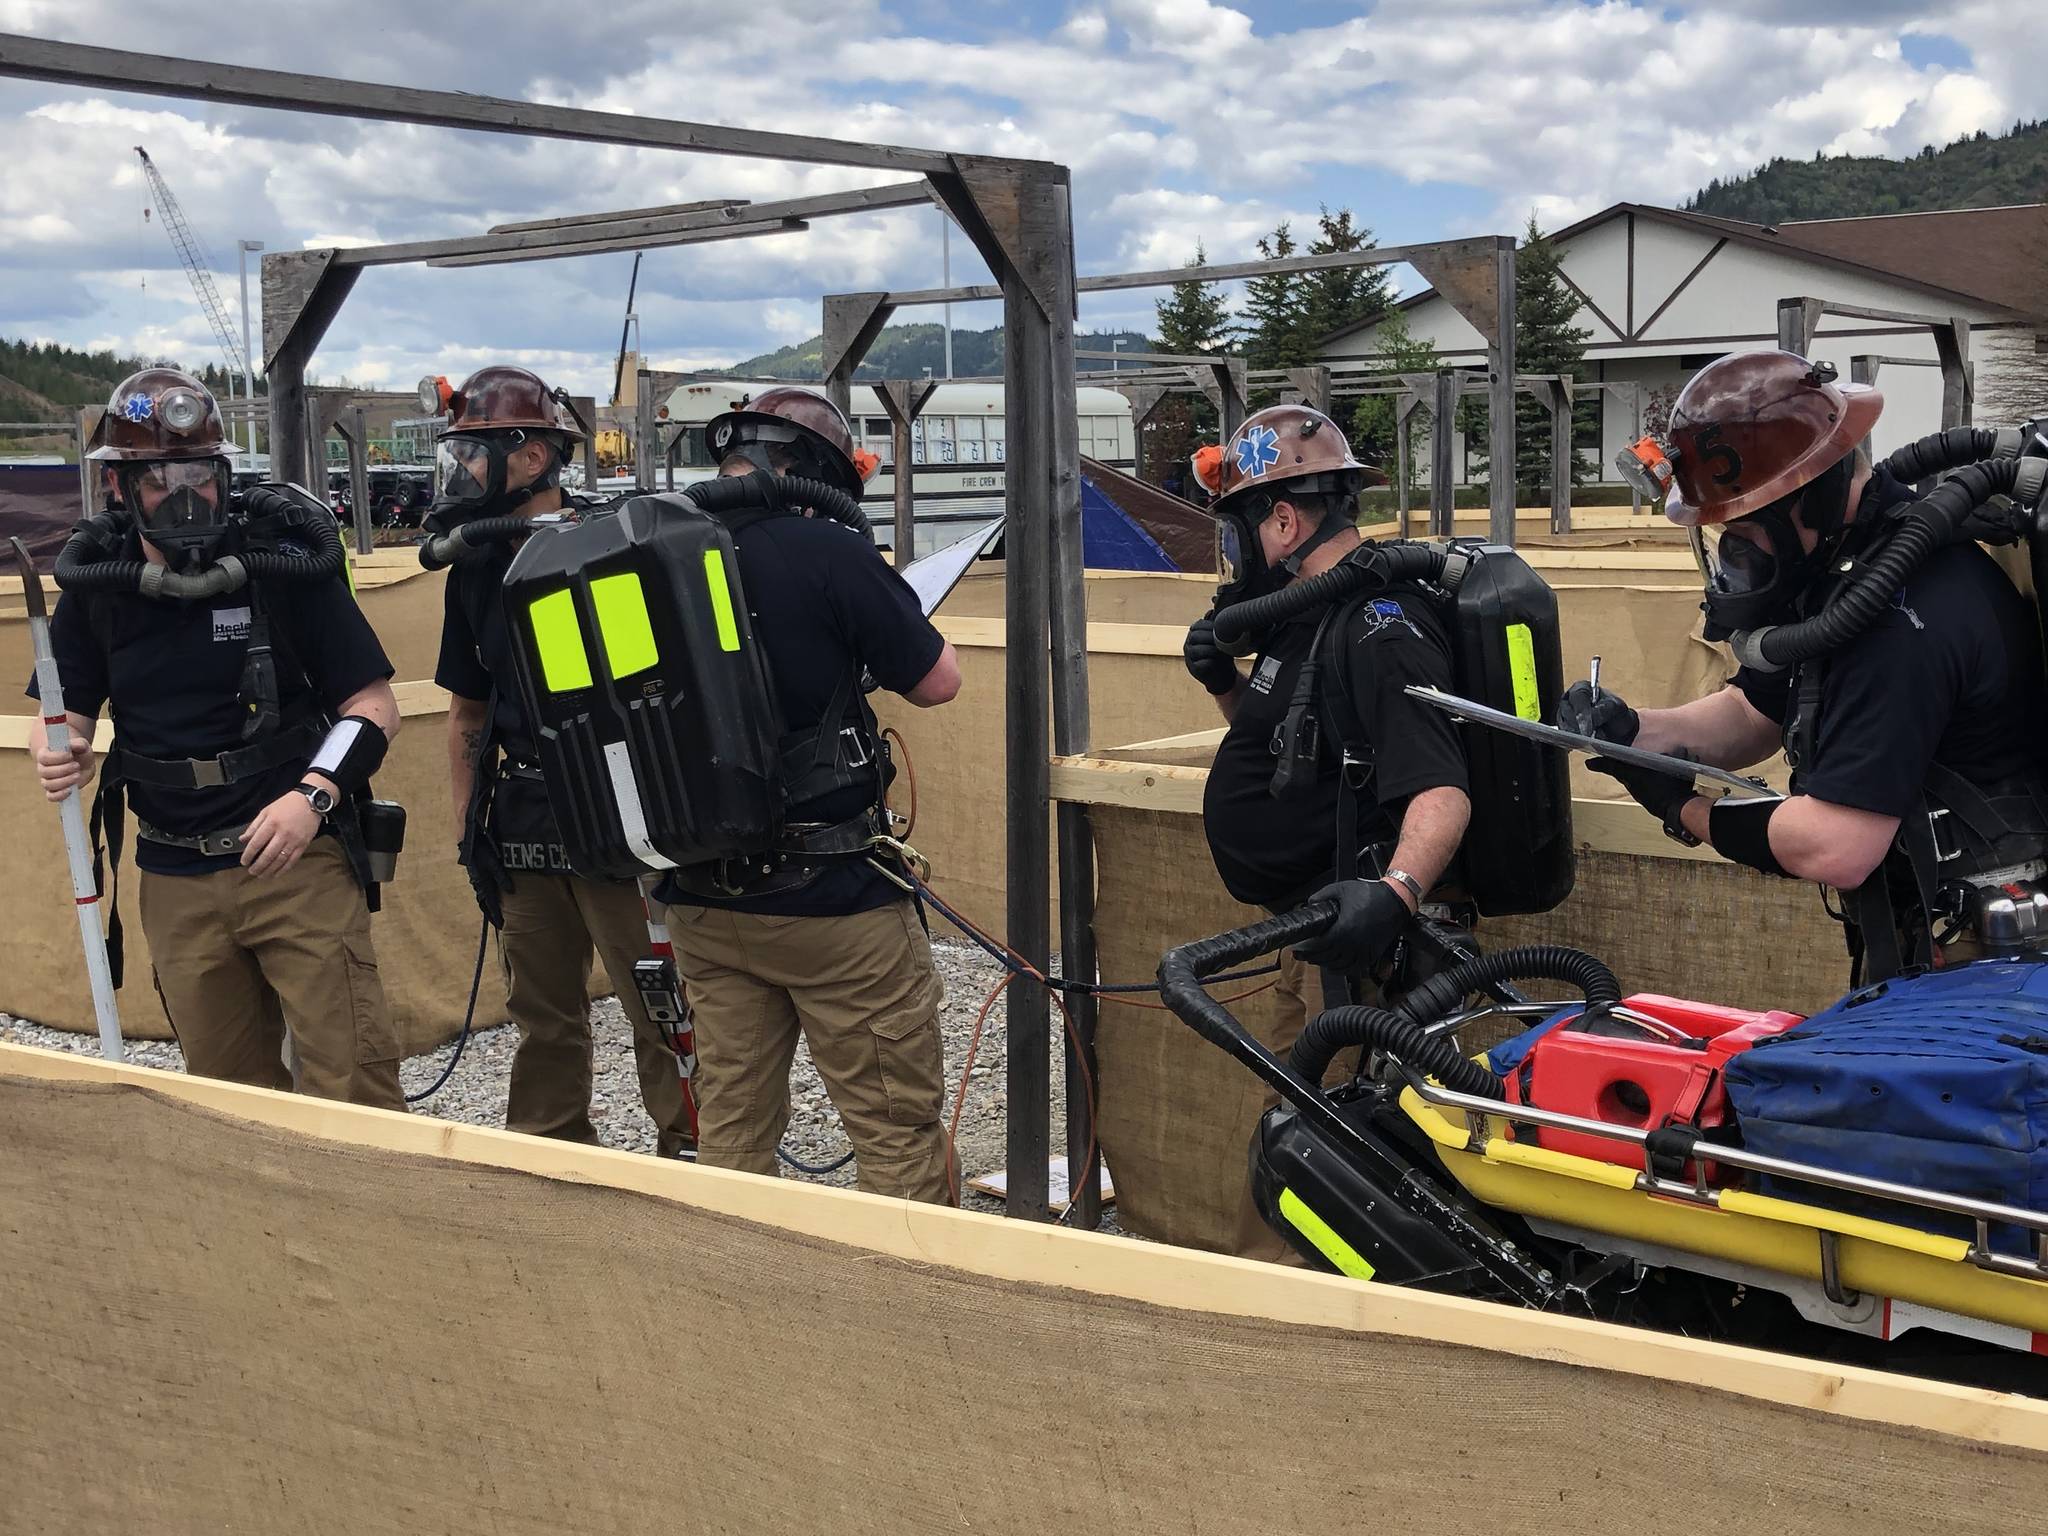 Members of the Greens Creek Mine rescue team participate in an event at the Central Mine Rescue Competition in Kellogg, Idaho in May. (Courtesy photo | Greens Creek Mine)